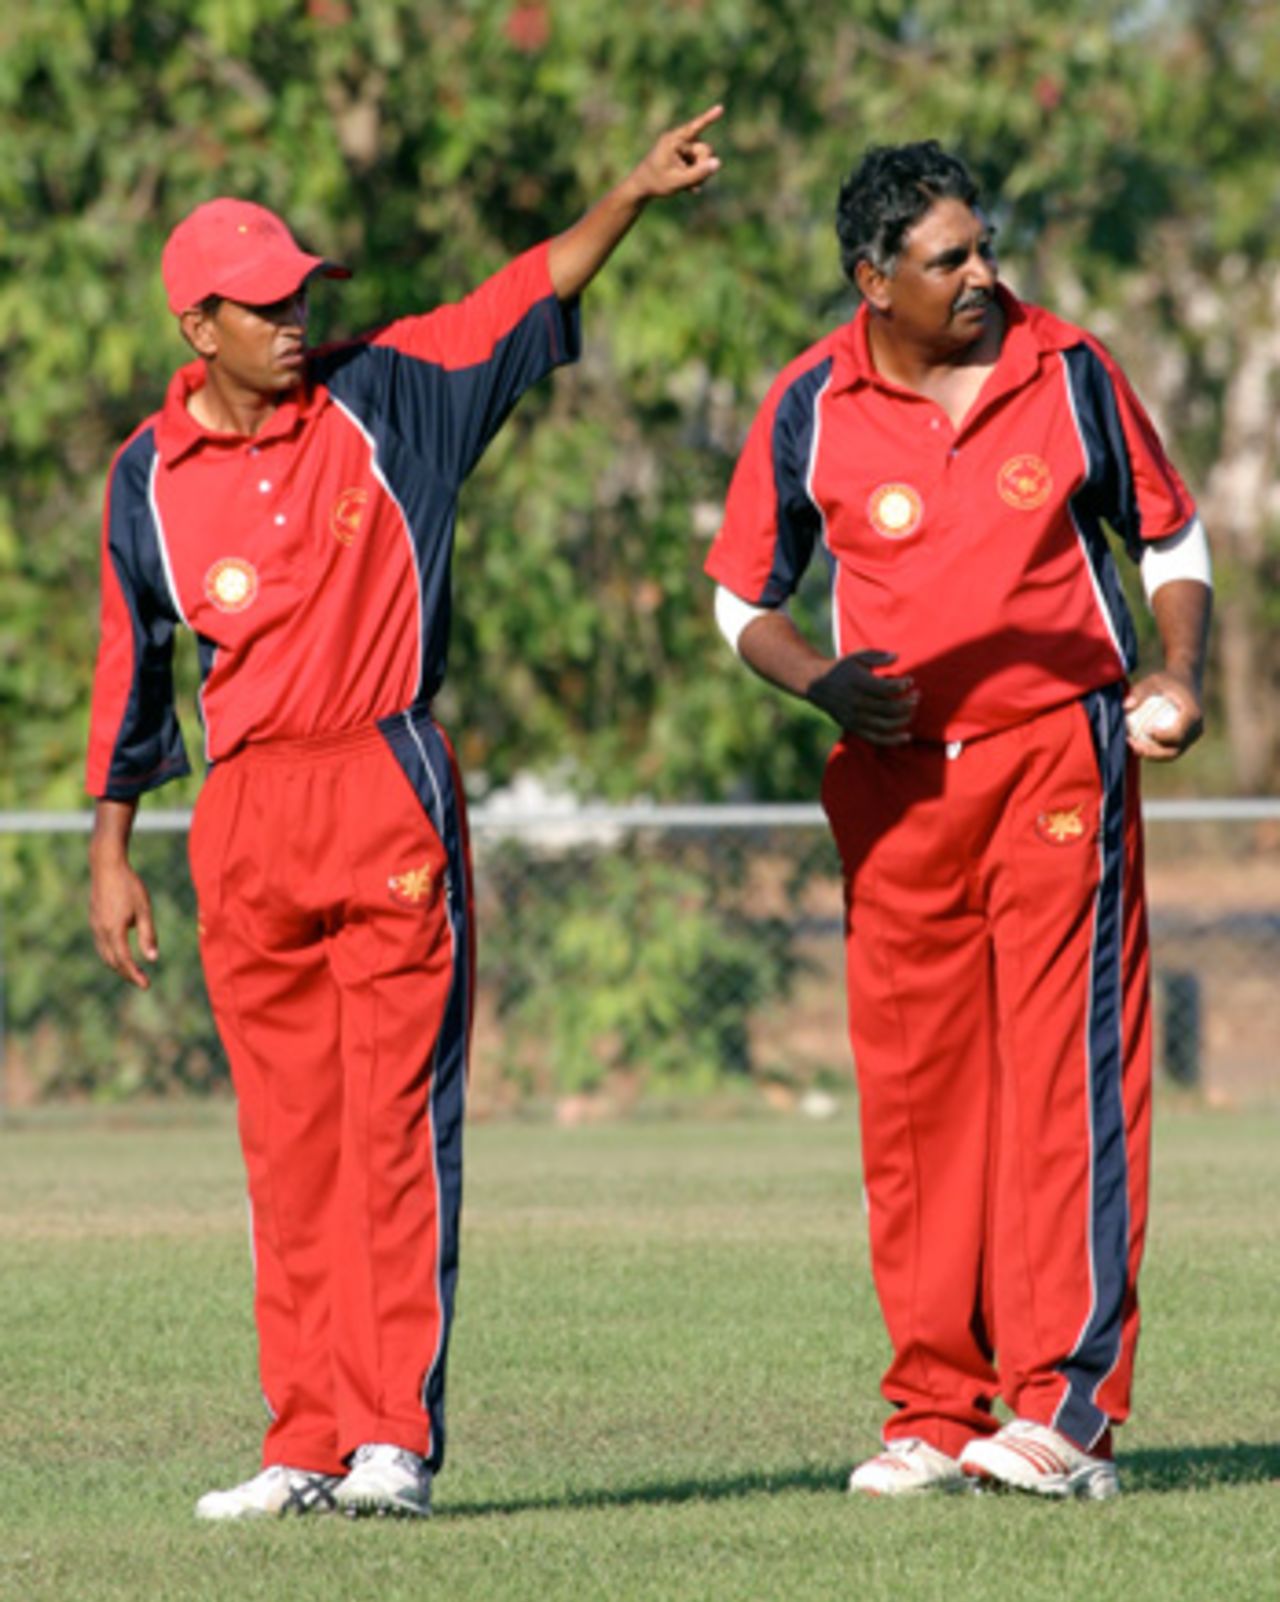 Ilyas Gull gives Rahul Sharma the chance to finish things off in his last outing for Hong Kong v. Tanzania, Power Park - ICC WCL Div 3 - 02.06.2007